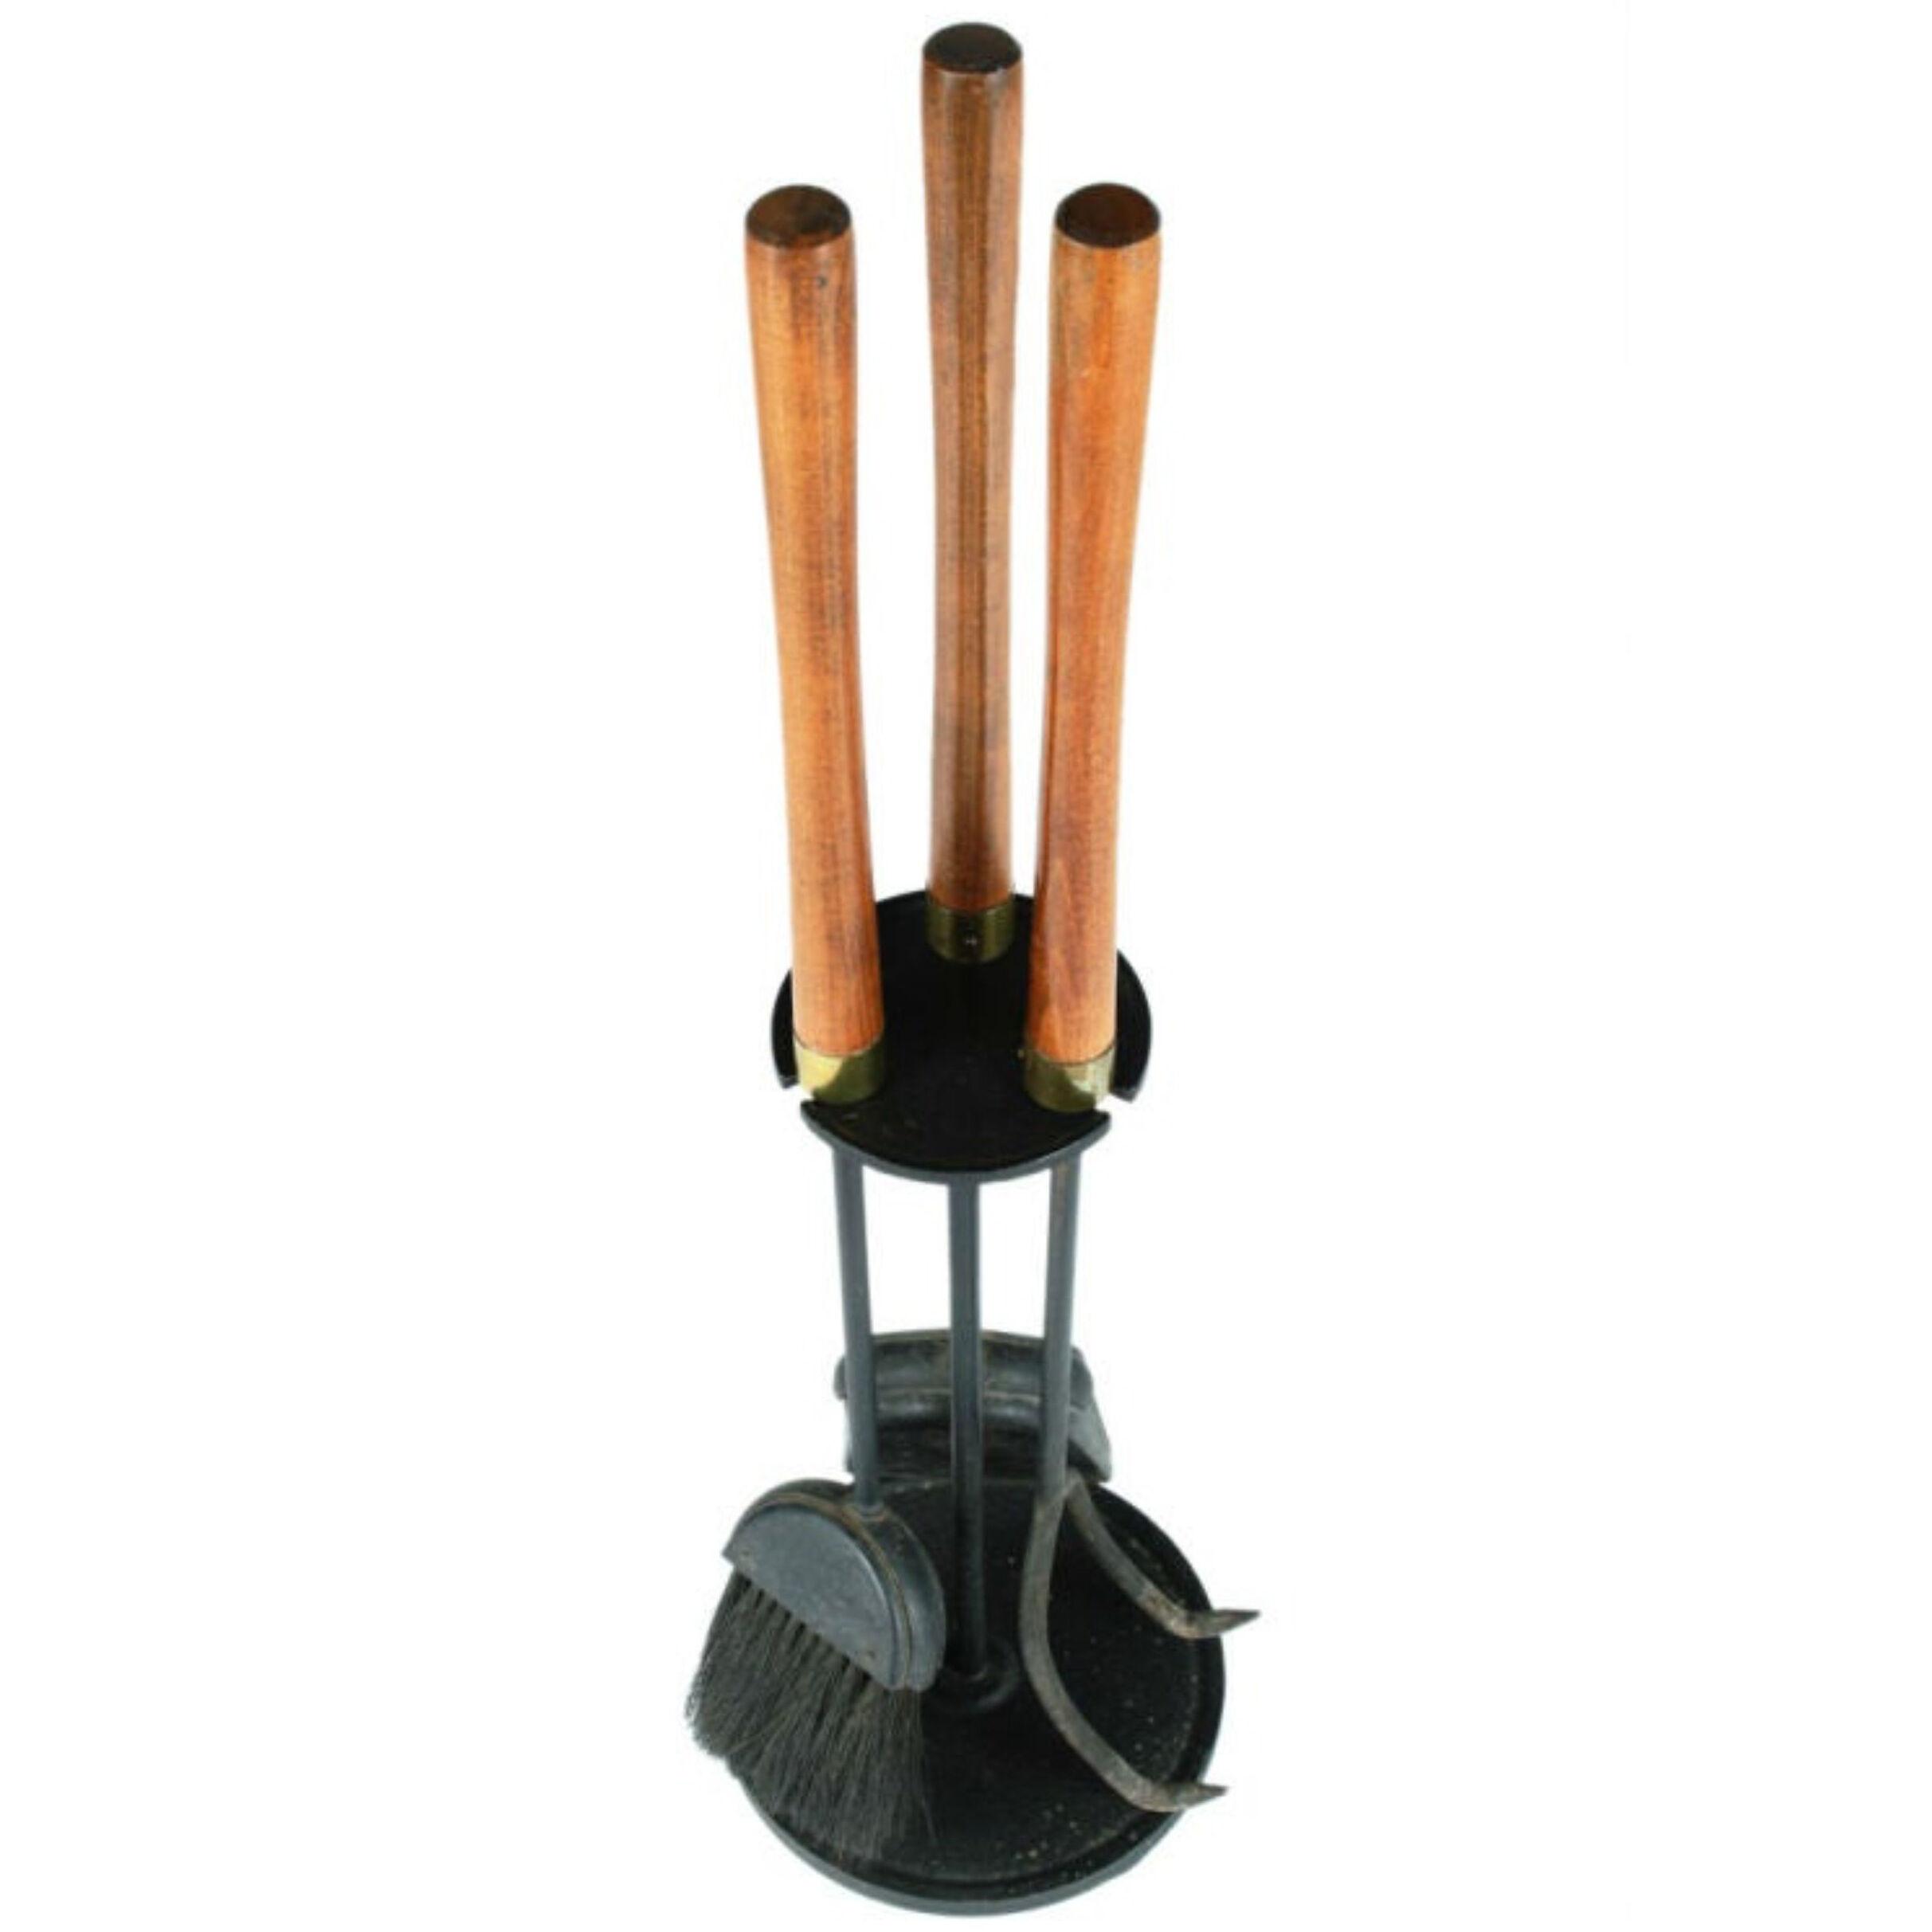 Walnut and Wrought Iron Firetools by Seymor Manufacturing Company	